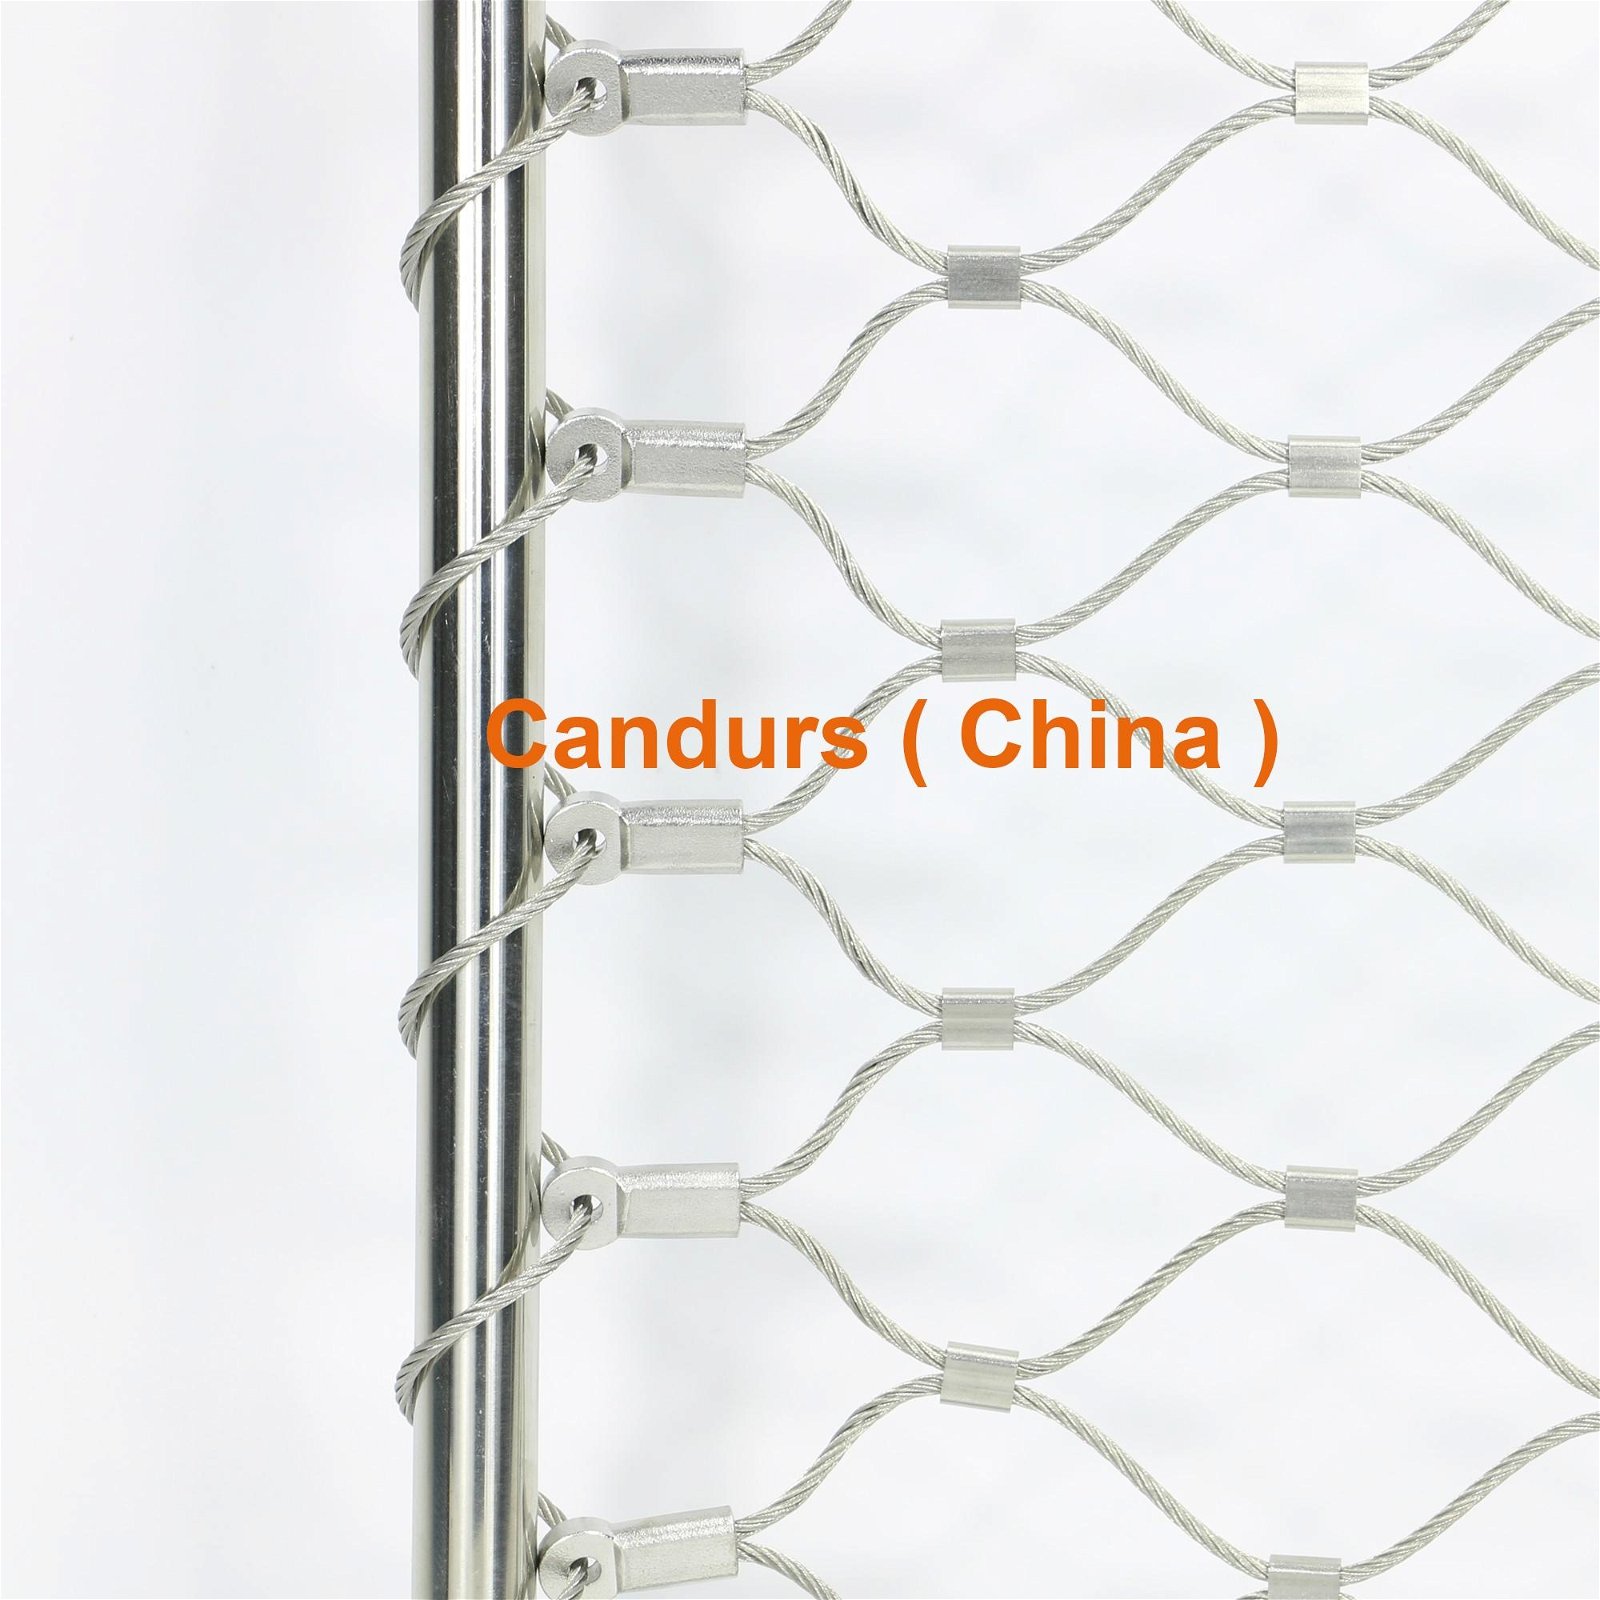 Flexible Stainless Steel Rope Fence On Bridges And Staircase 1